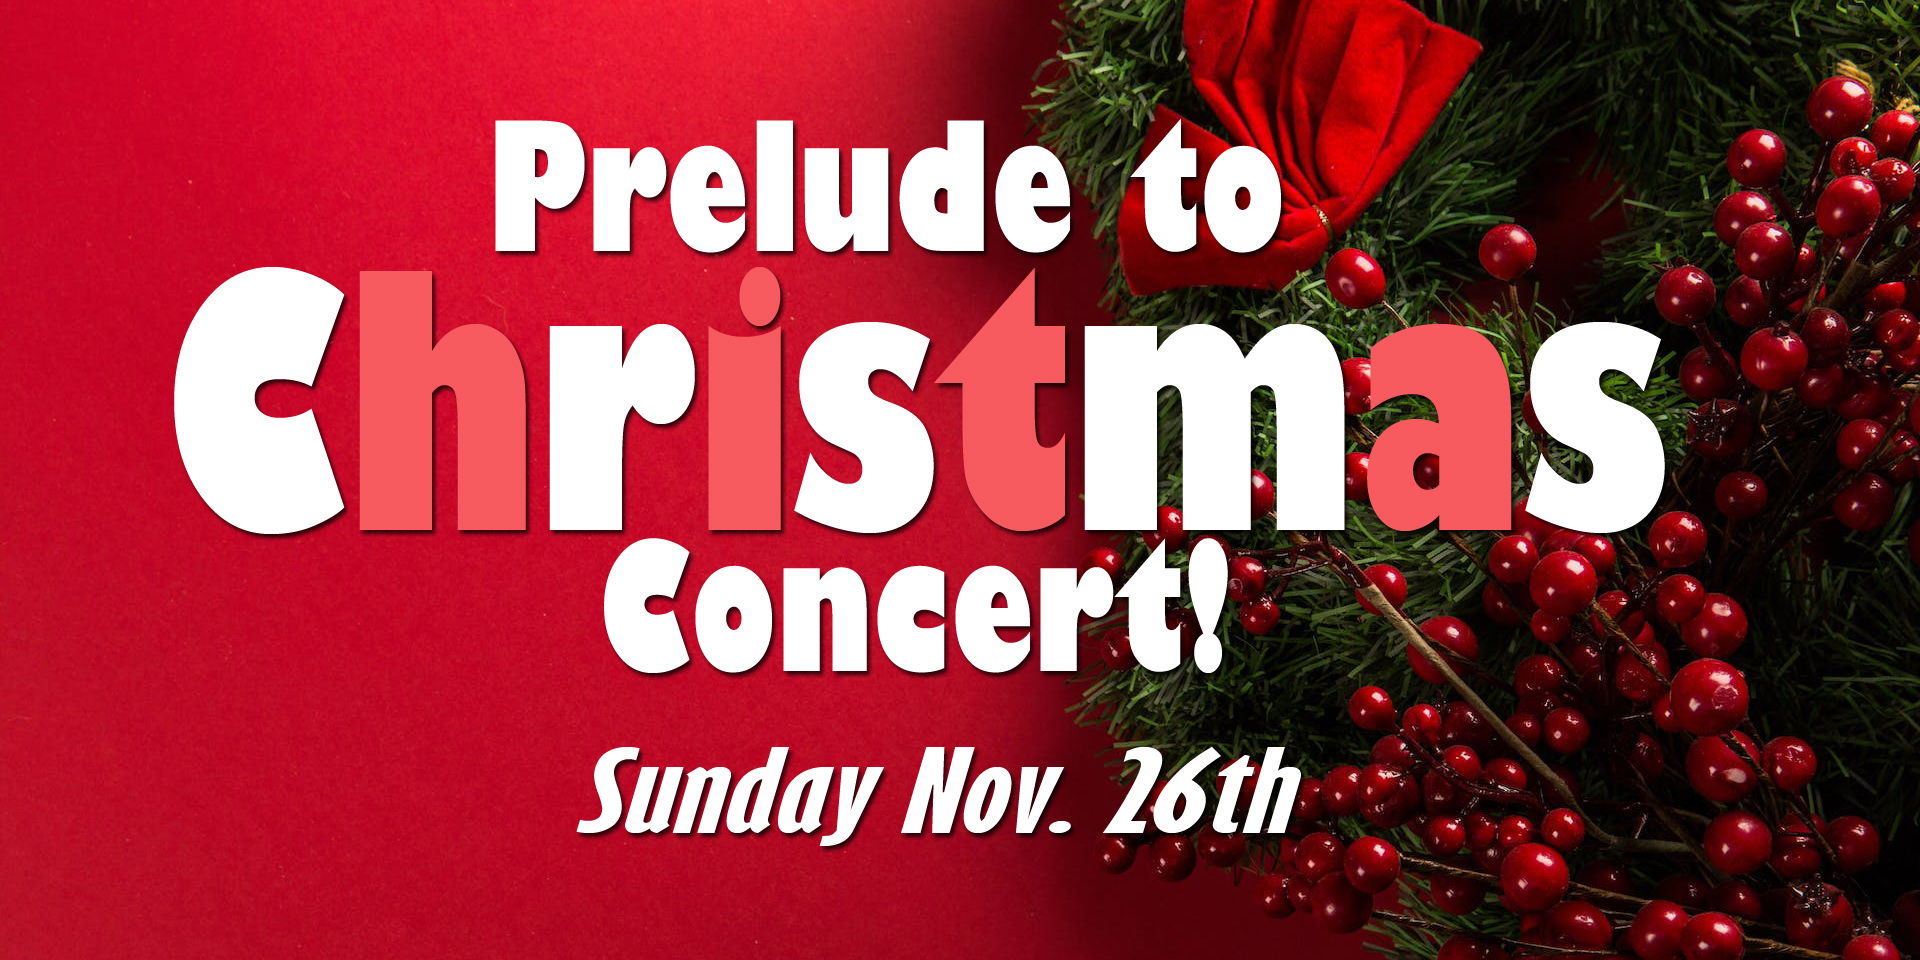 Prelude to Christmas Concert w/ Pittsburgh's Syria Shriners  promotional image